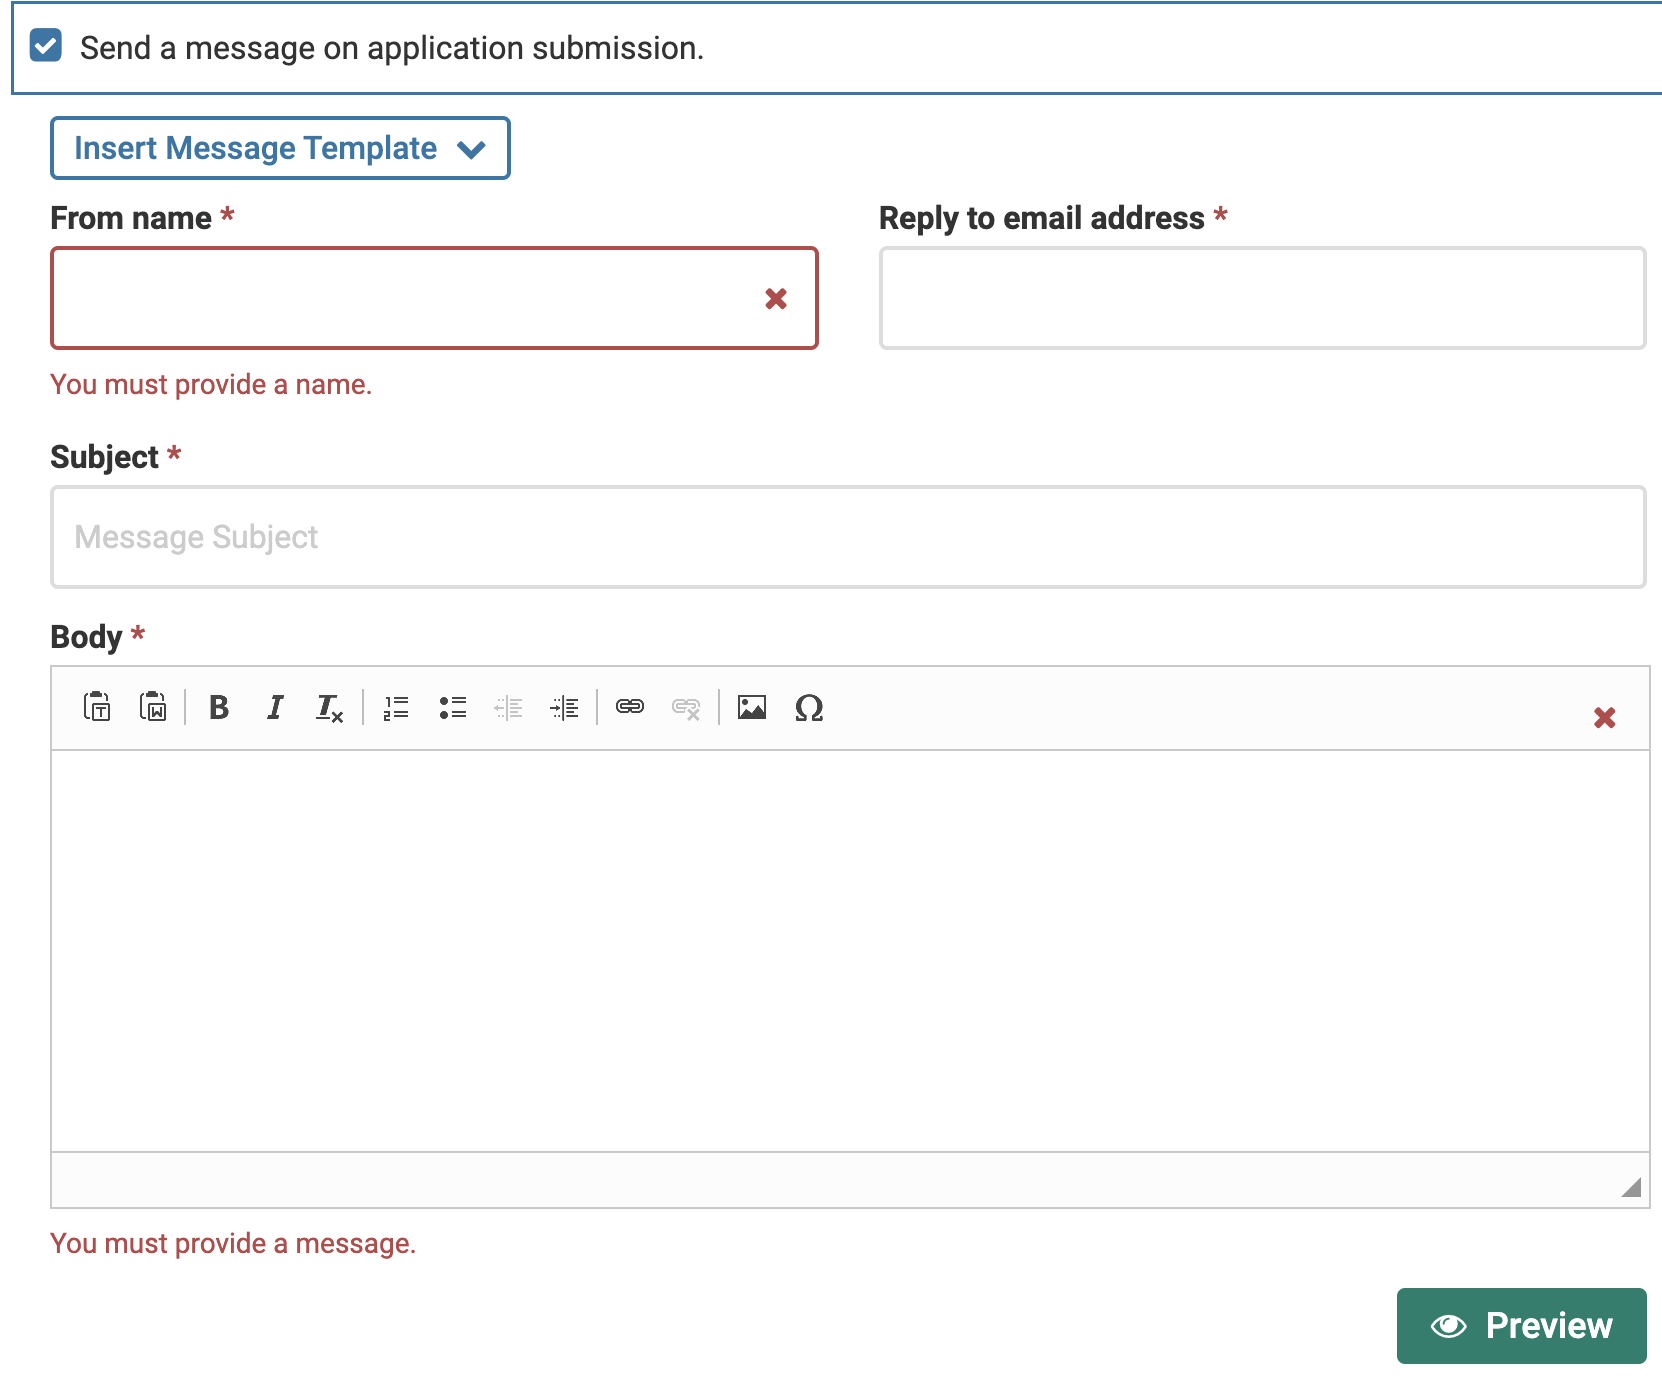 Send a message on application submission checkbox is selected